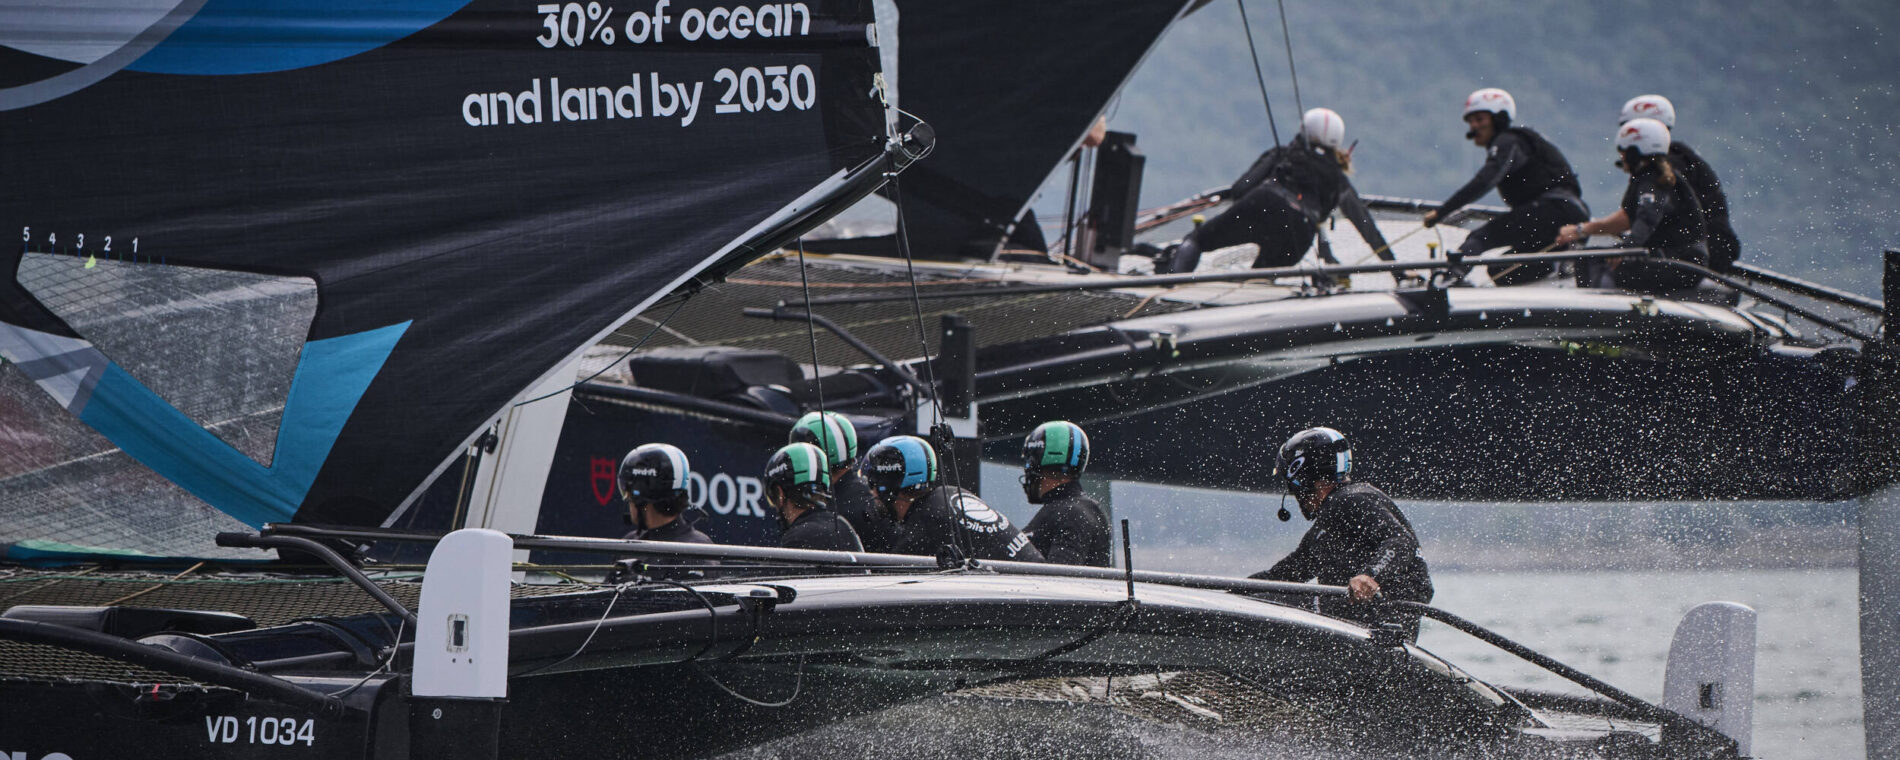 Spindrift rise to the top at TF35 Malcesine Cup